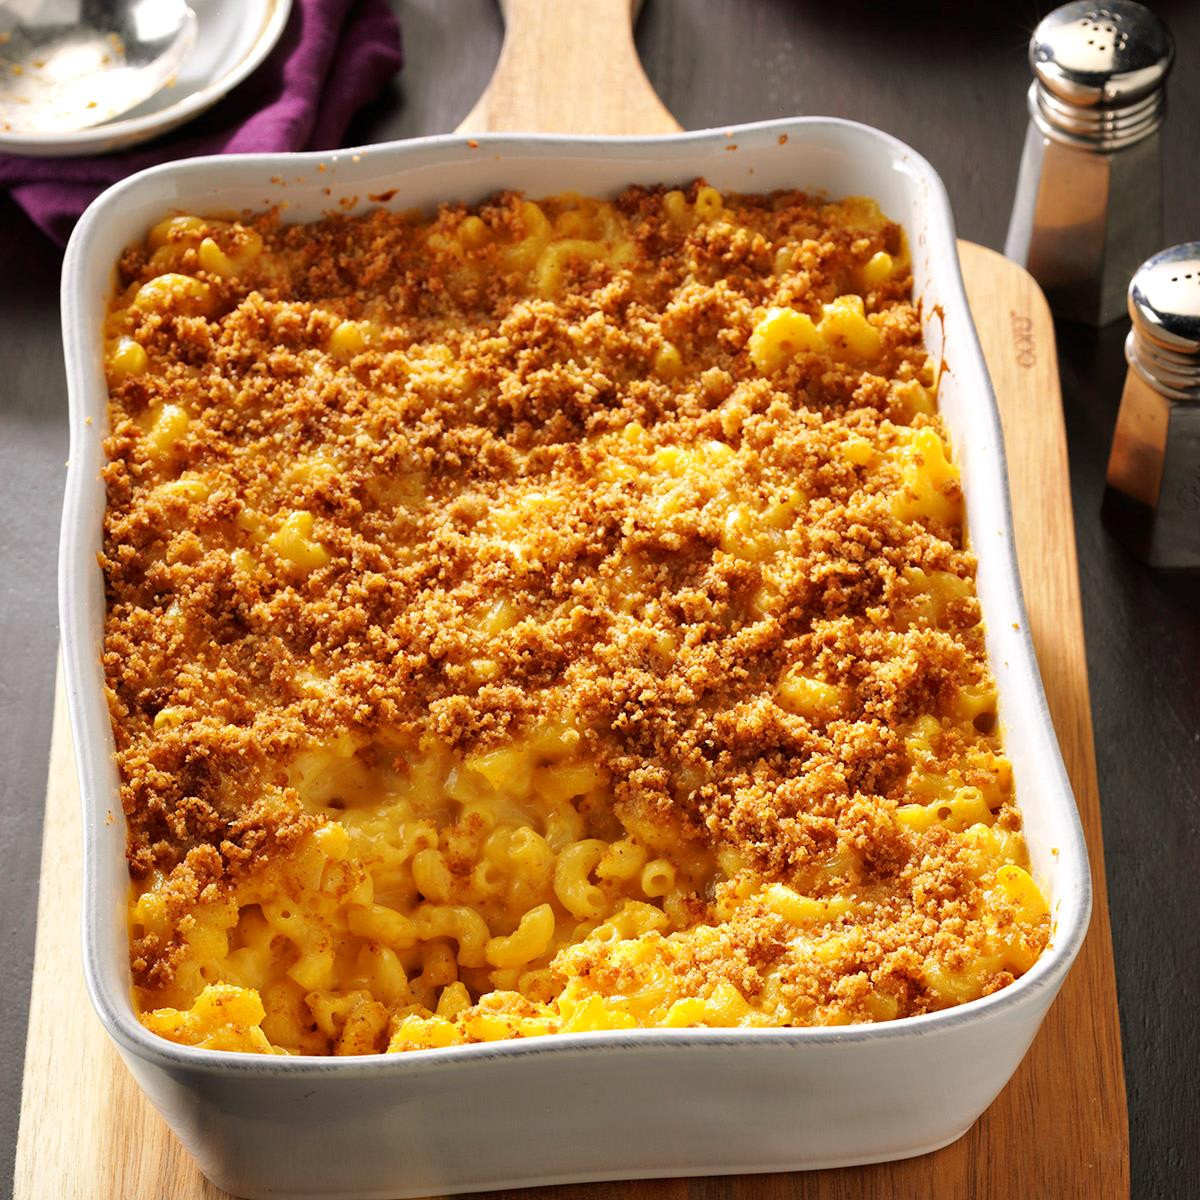 Best Macaroni And Cheese Recipe Baked
 Baked Mac and Cheese Recipe